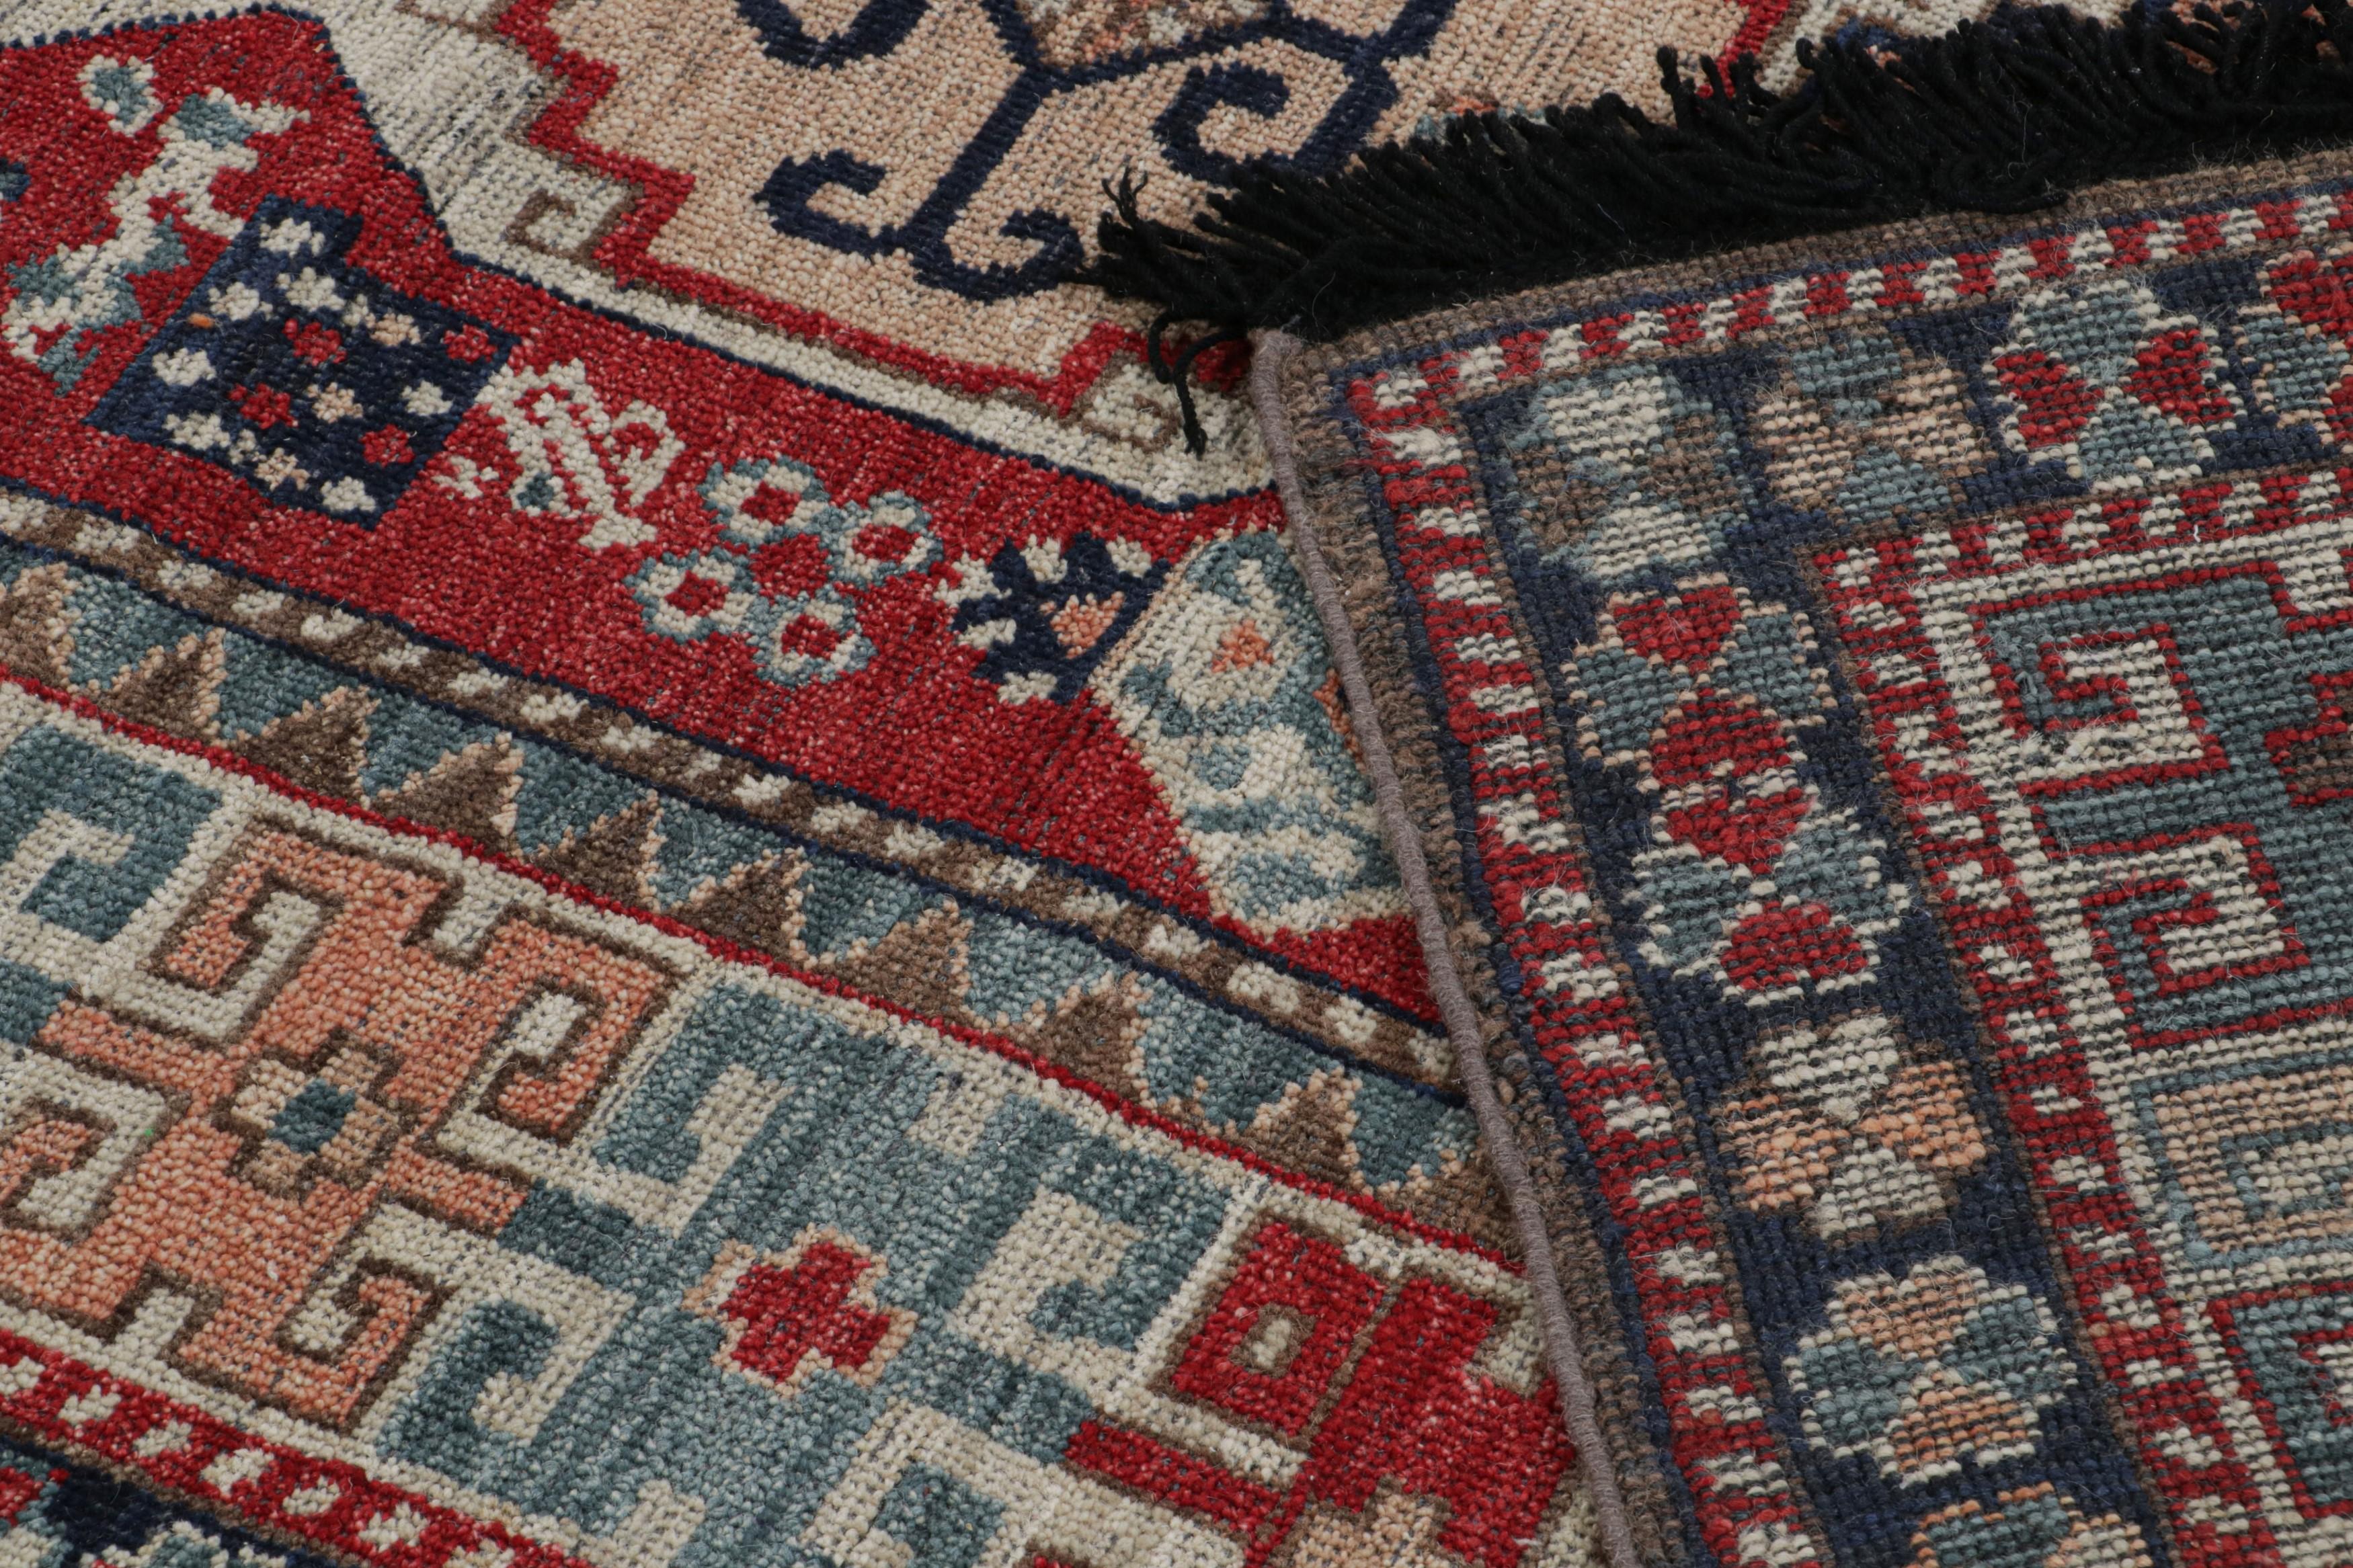 Wool Rug & Kilim’s Tribal Style Rug in Red with Pink & Blue Geometric Medallions For Sale